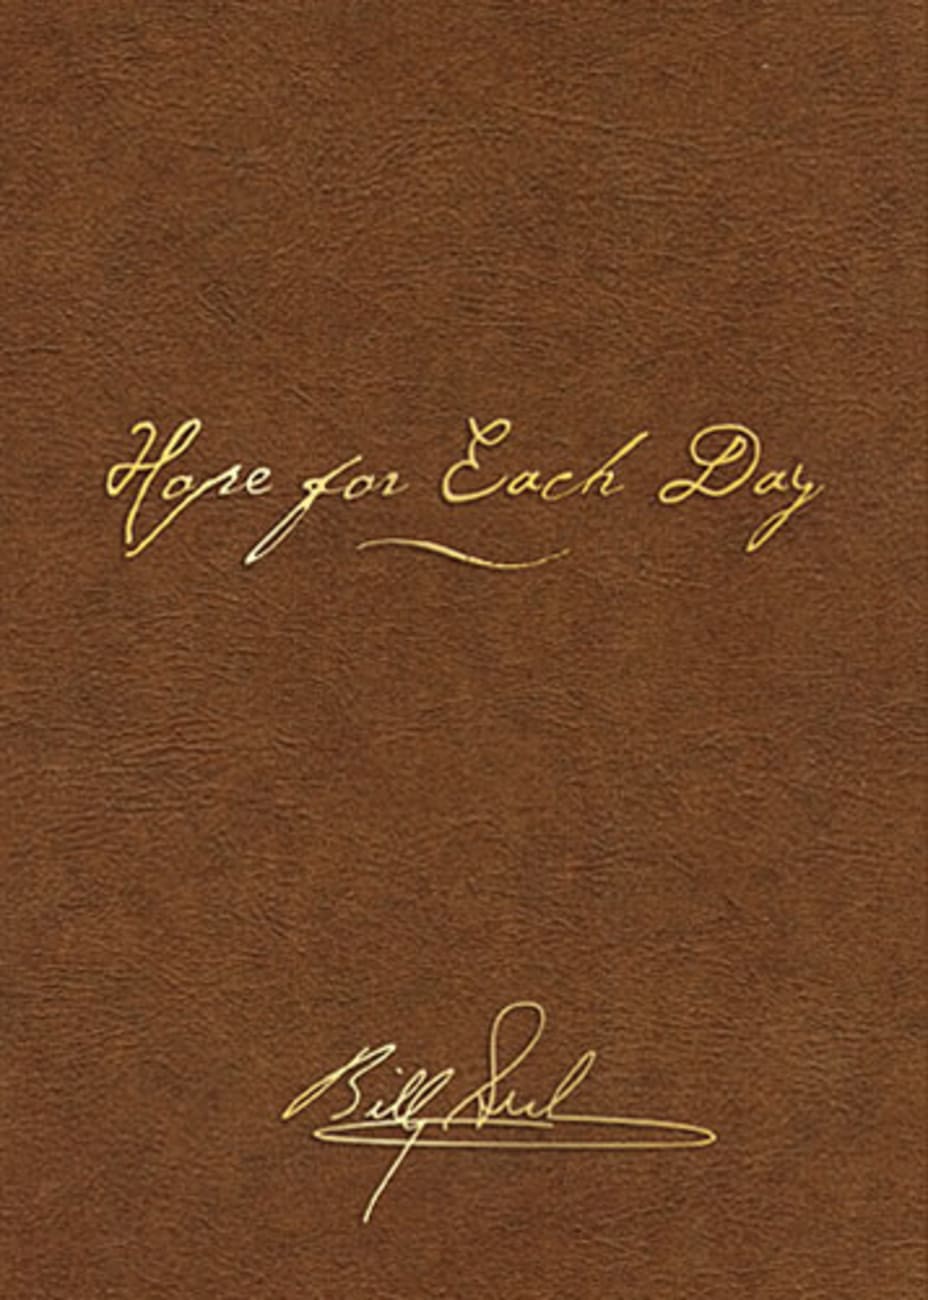 Hope For Each Day (Signature Edition) Imitation Leather